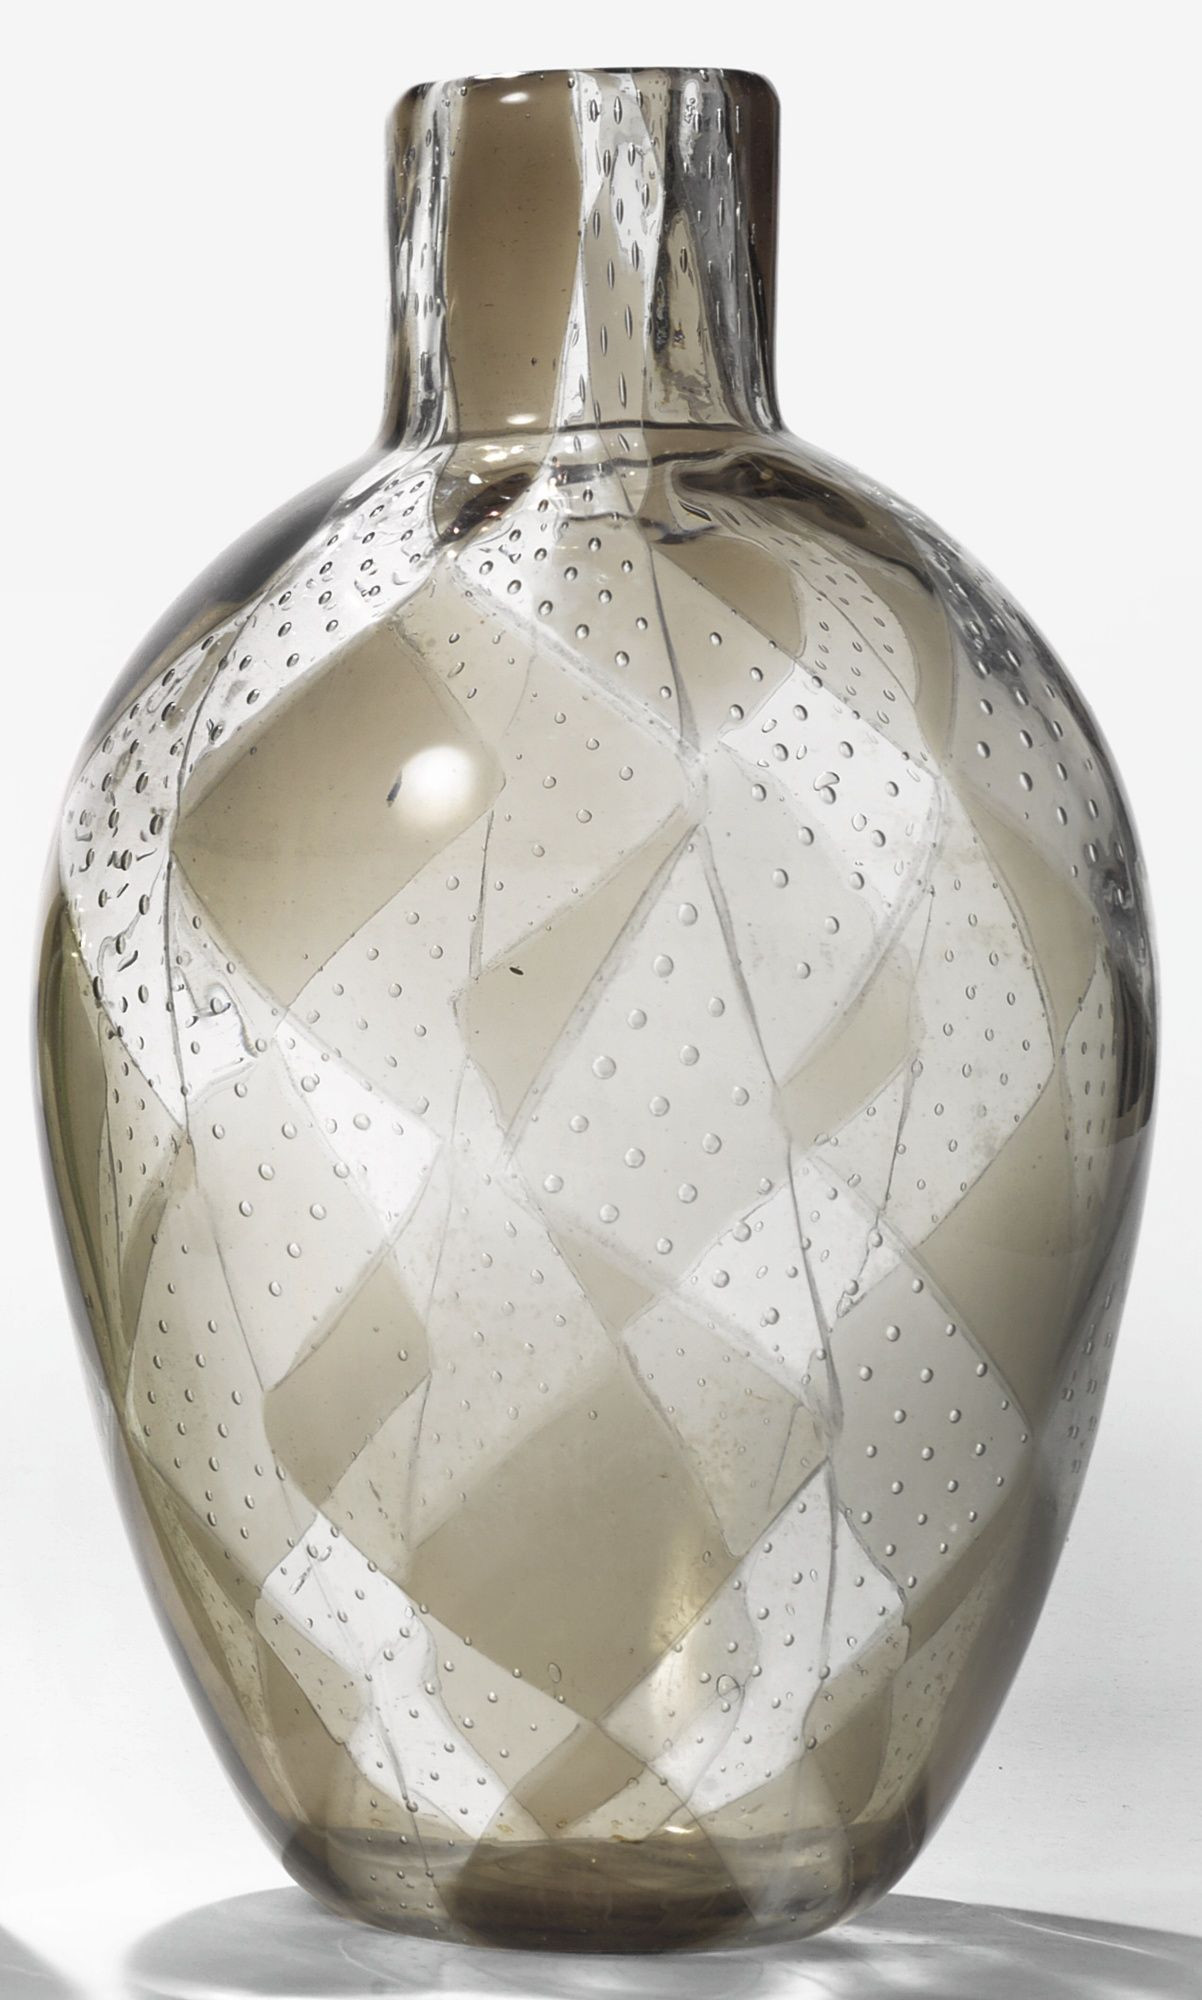 16 Fashionable Glass Vase with Bubbles 2022 free download glass vase with bubbles of ercole barovier intarsio vase glass tesserae with internal air inside ercole barovier intarsio vase glass tesserae with internal air bubbles circa 1965